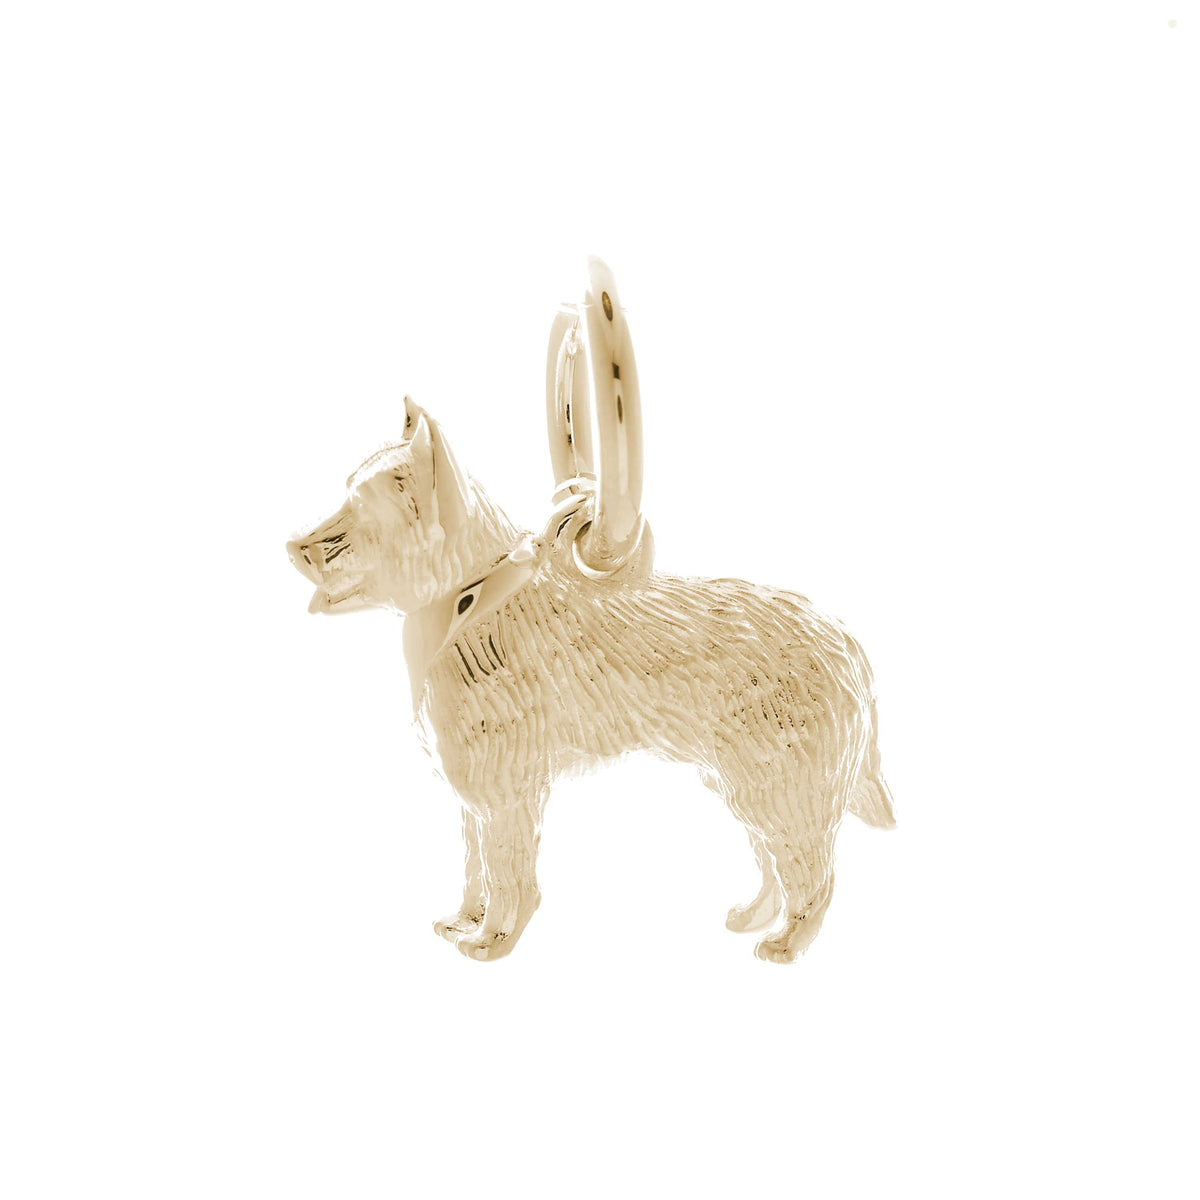 Solid 9ct gold German Shepherd charm with tiny bandana, perfect for a charm bracelet or necklace.